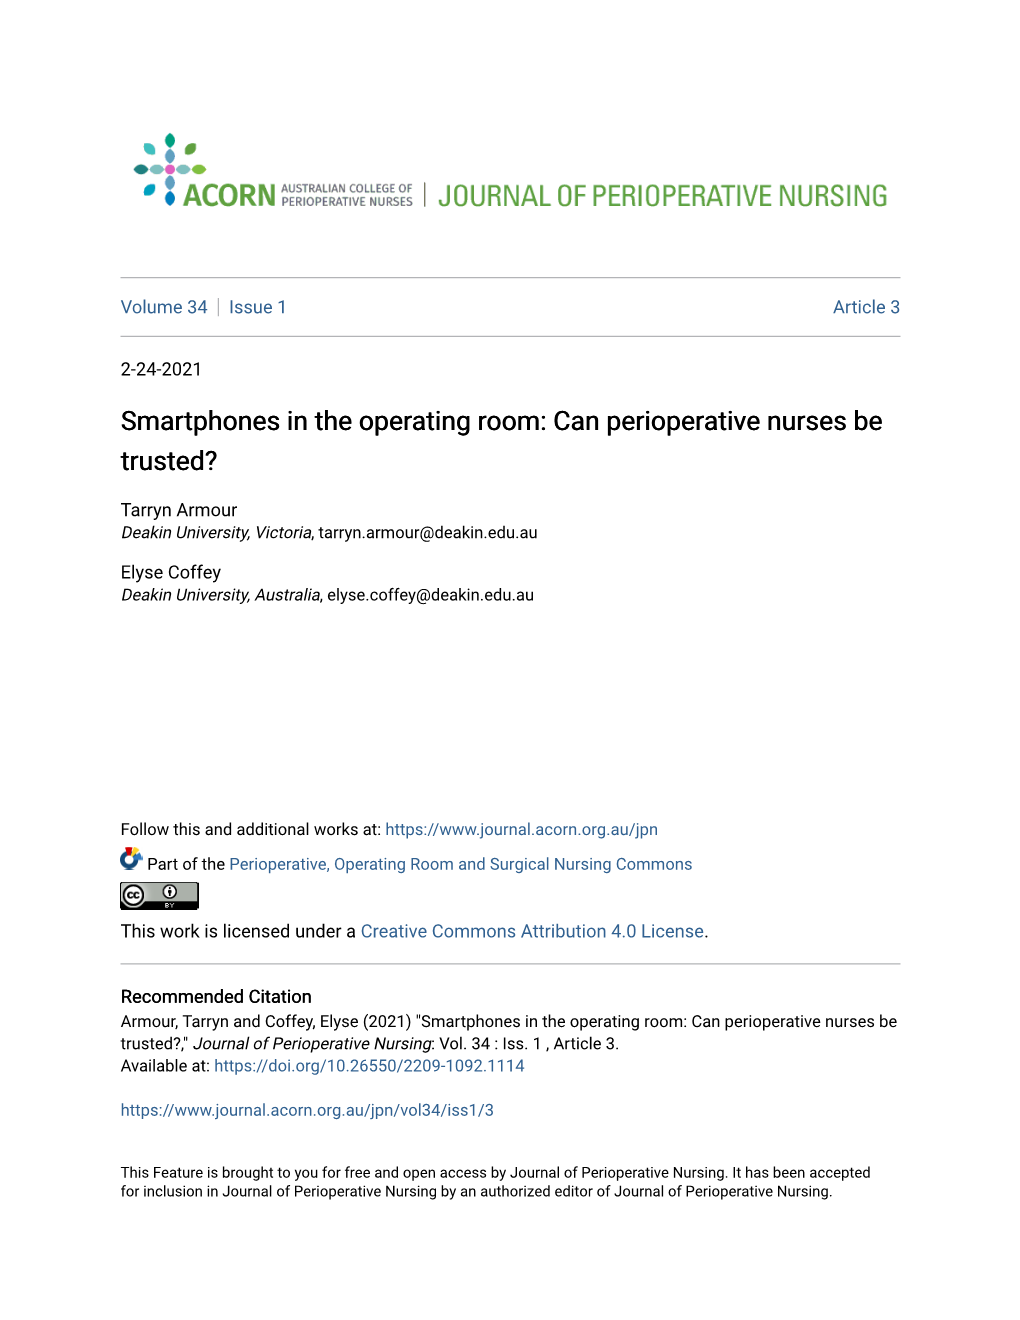 Smartphones in the Operating Room: Can Perioperative Nurses Be Trusted?